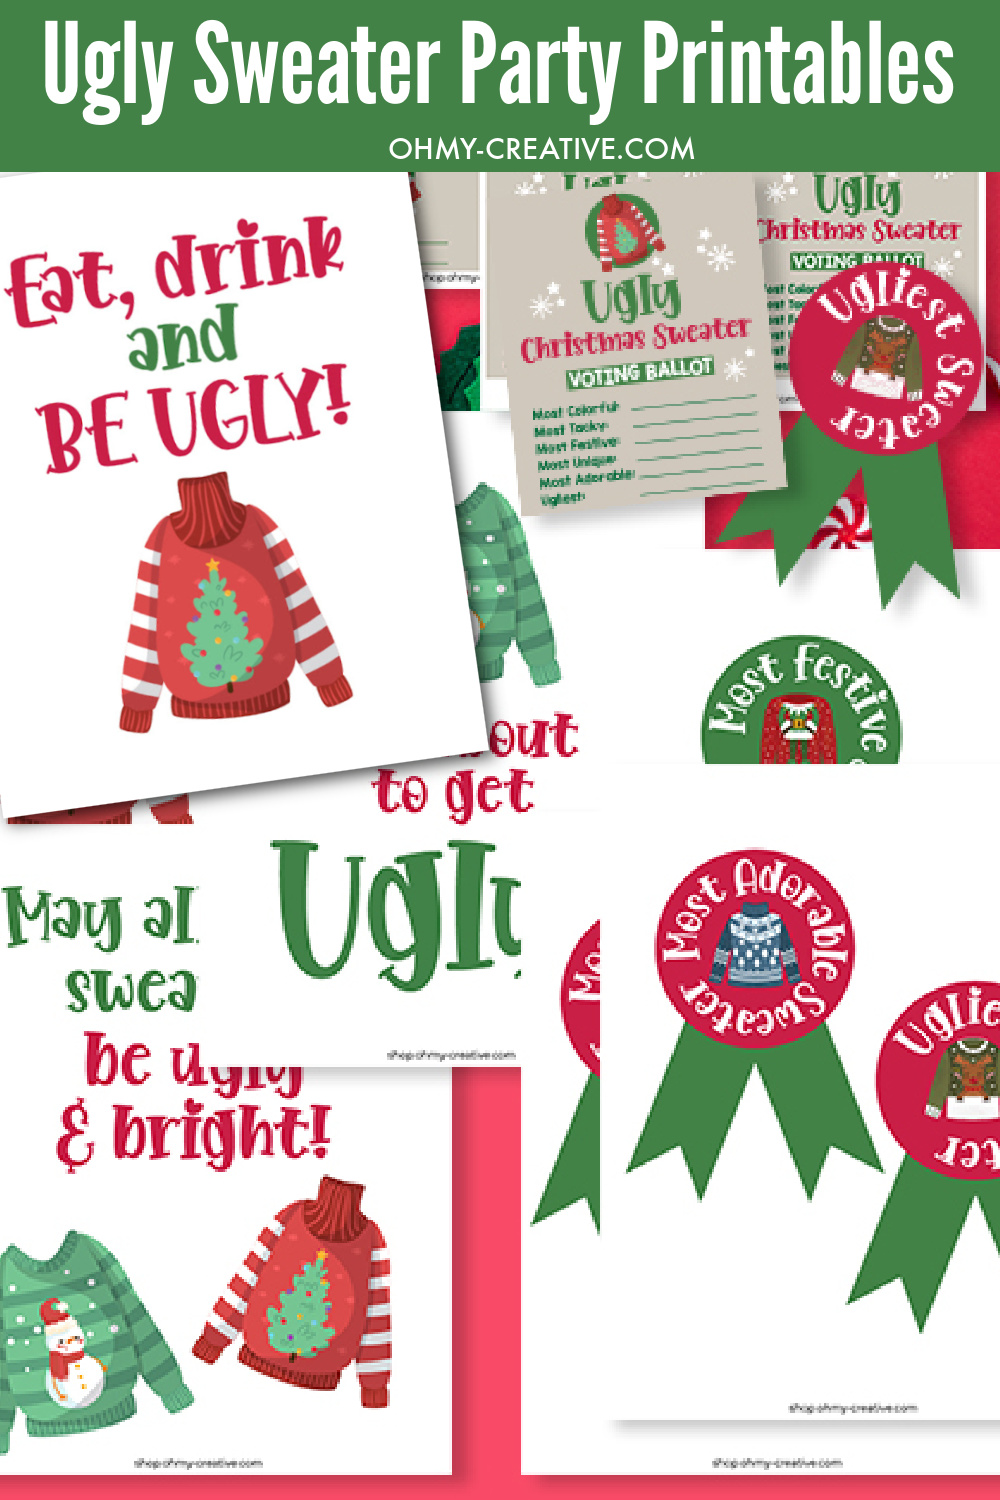 Included in the Ugly Sweater Party Printables is ugly sweater invitations, ugly sweater voting ballots, ugly Christmas sweater decorations and ugly Christmas sweater awards!